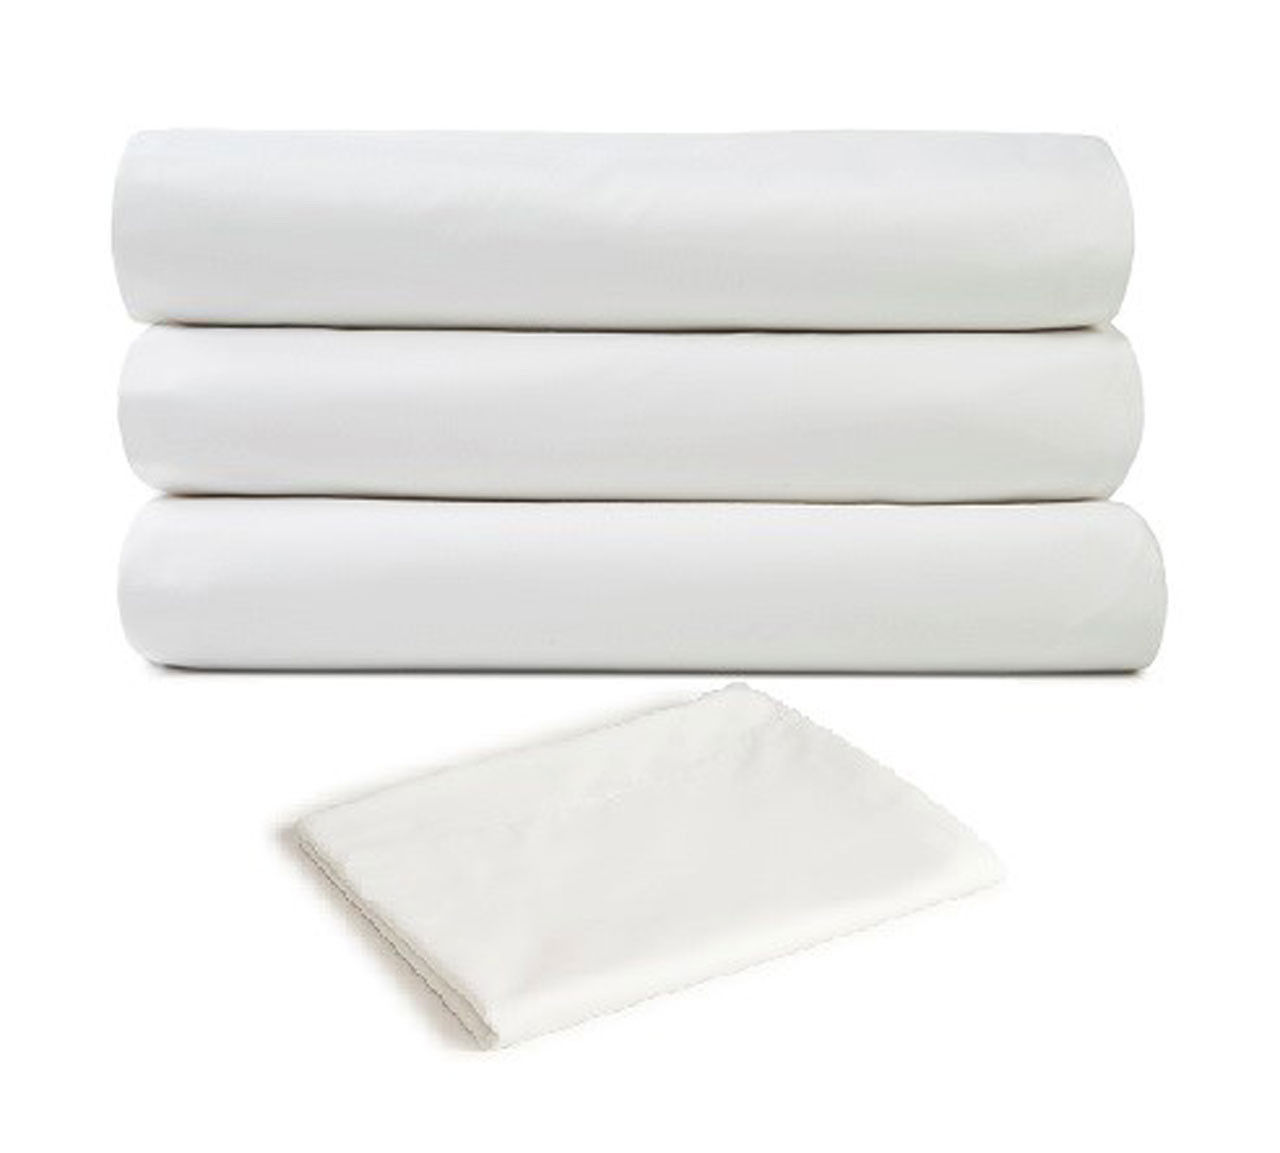 Are the Hotel Style White Bed Sheets made of 100 polyester?